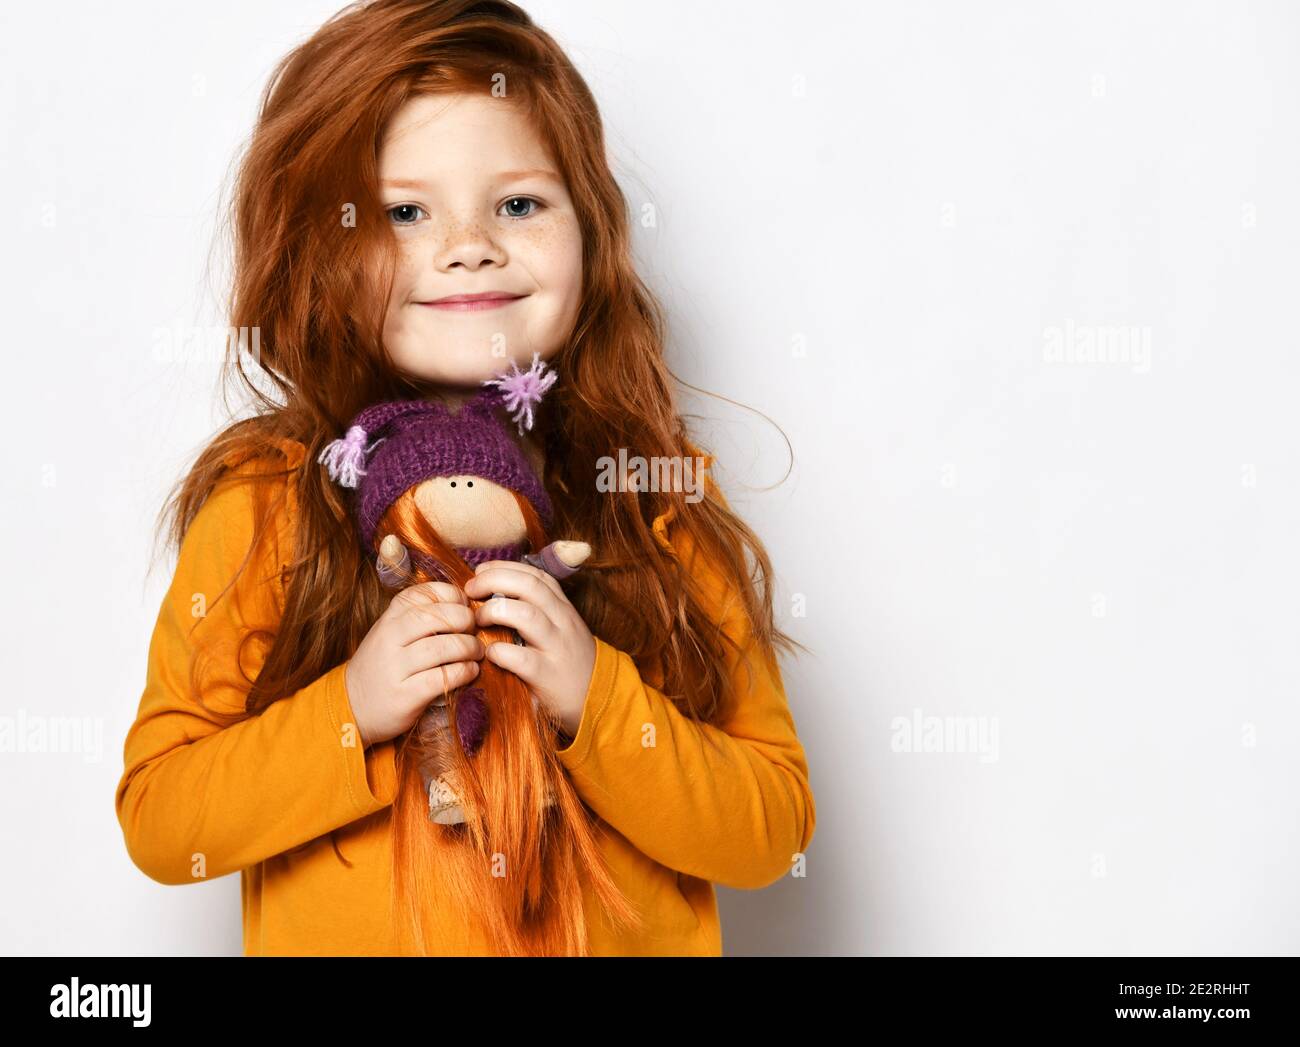 Little five-year-old red-haired kid girl in an orange sweatshirt smiles happily holding small redhair doll in her hands Stock Photo